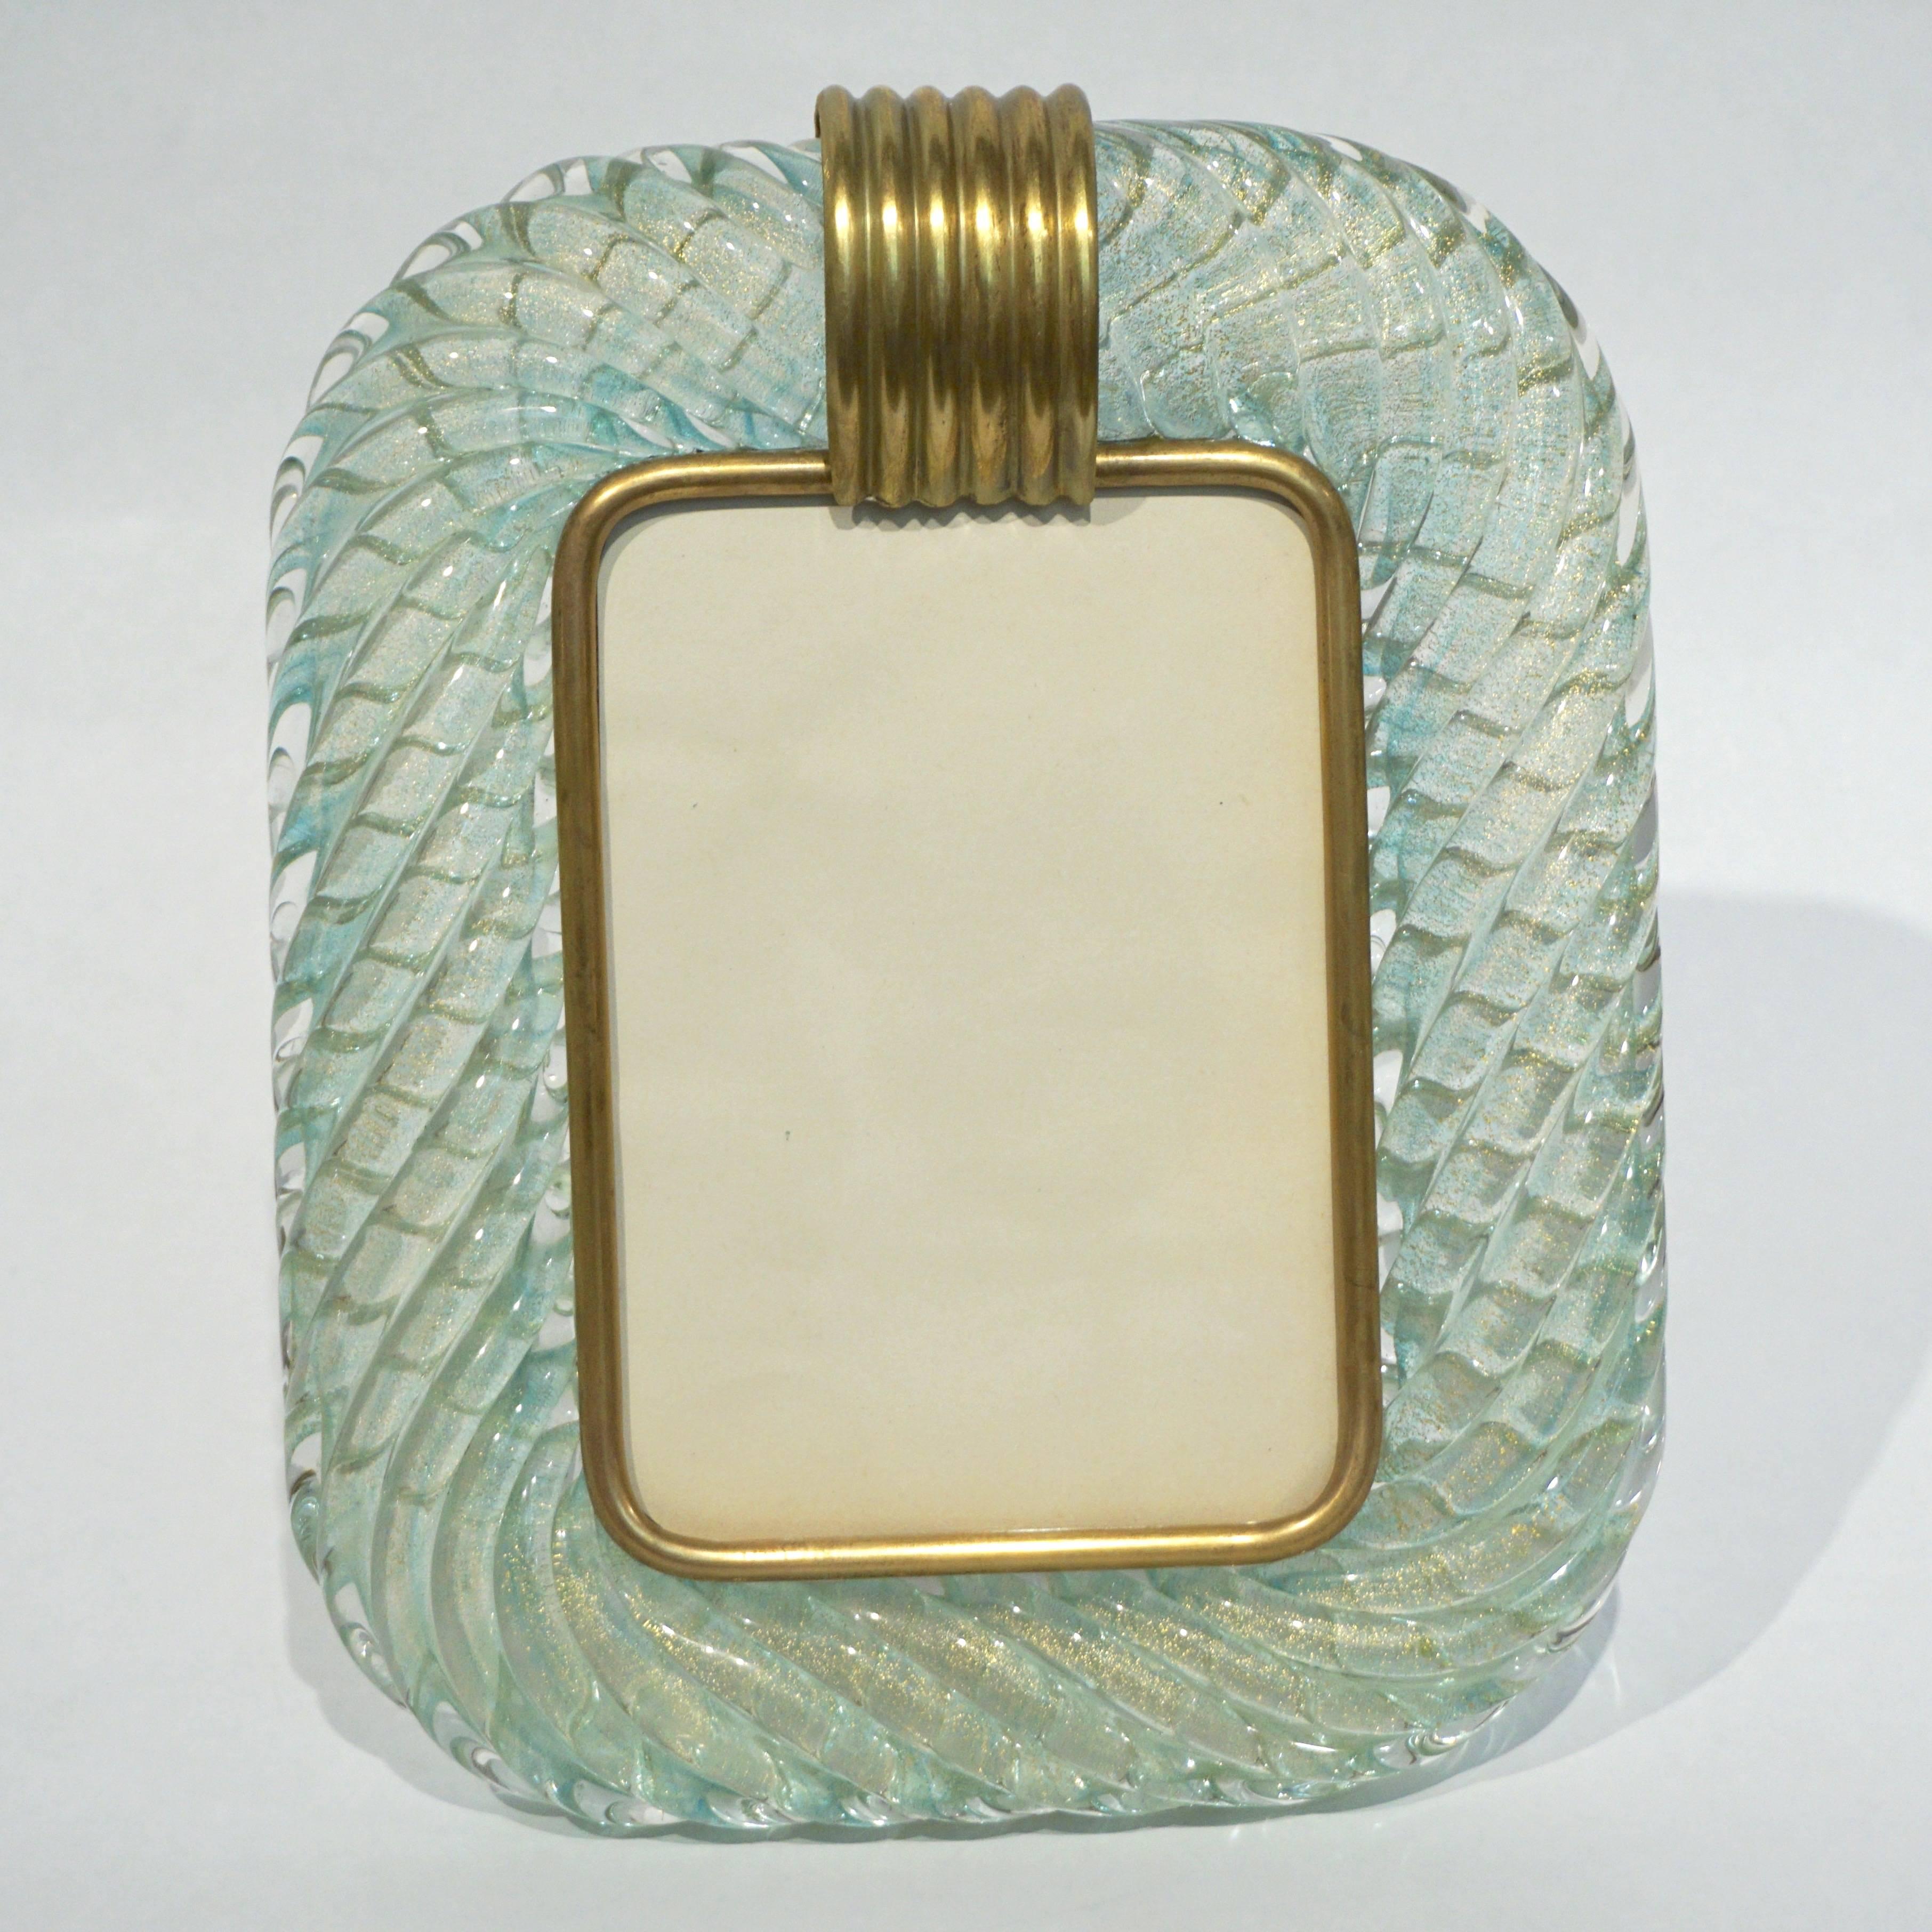 Barovier Toso Vintage Twisted Gold and Aqua Blue Murano Glass Photo Frame, 1970s 1